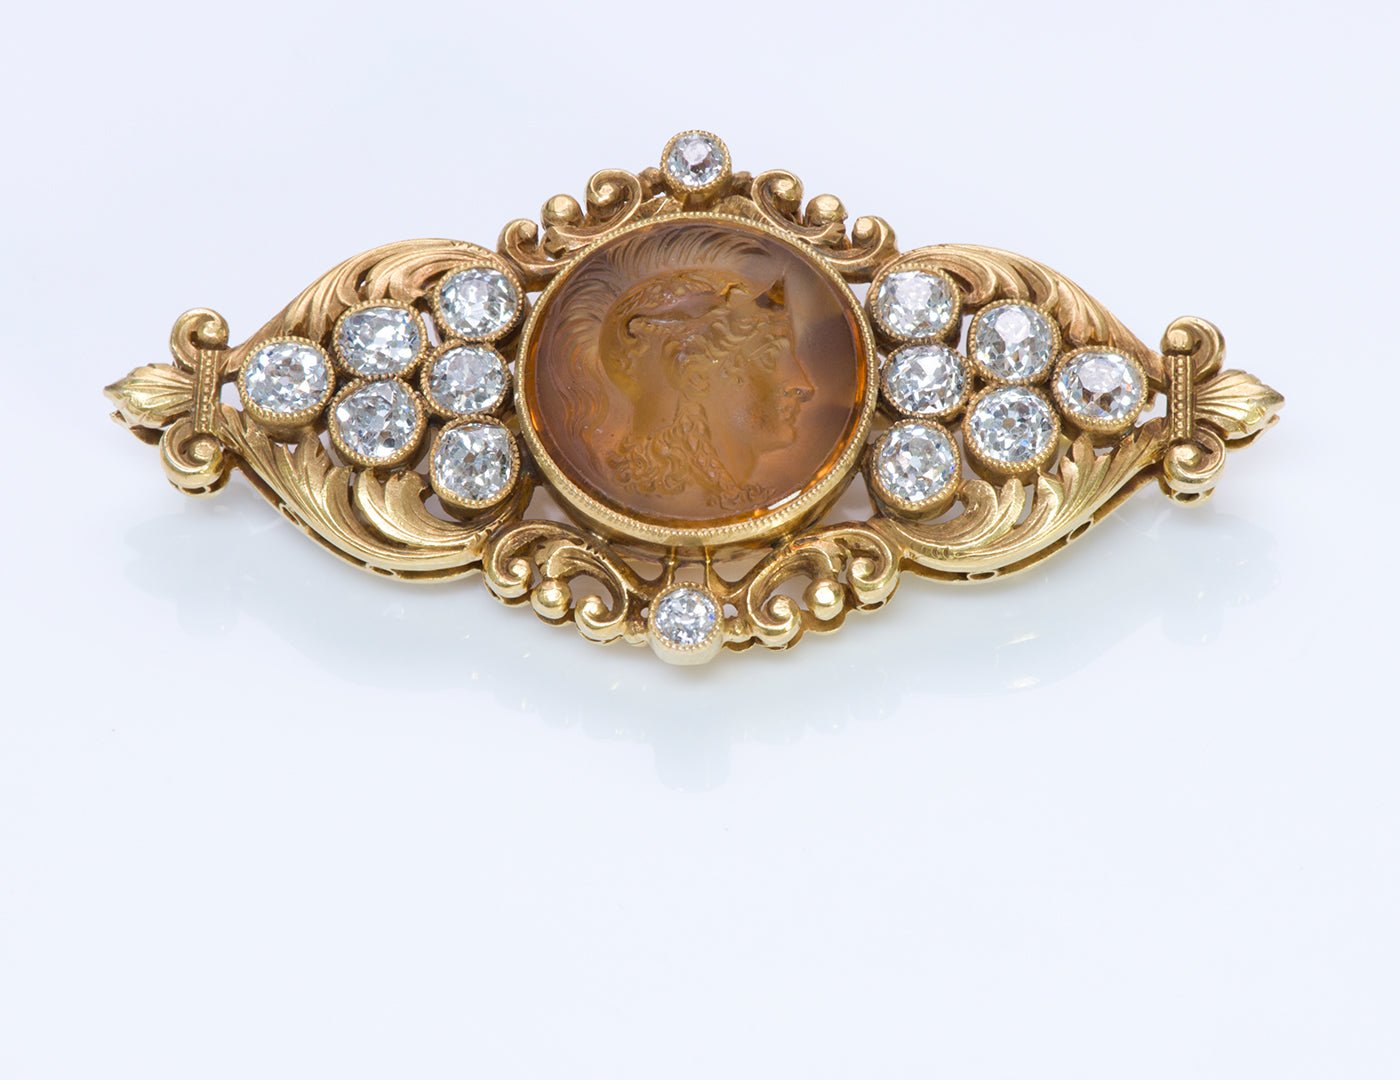 Five Most Common Misconceptions About Buying Antique Jewelry - DSF Antique Jewelry